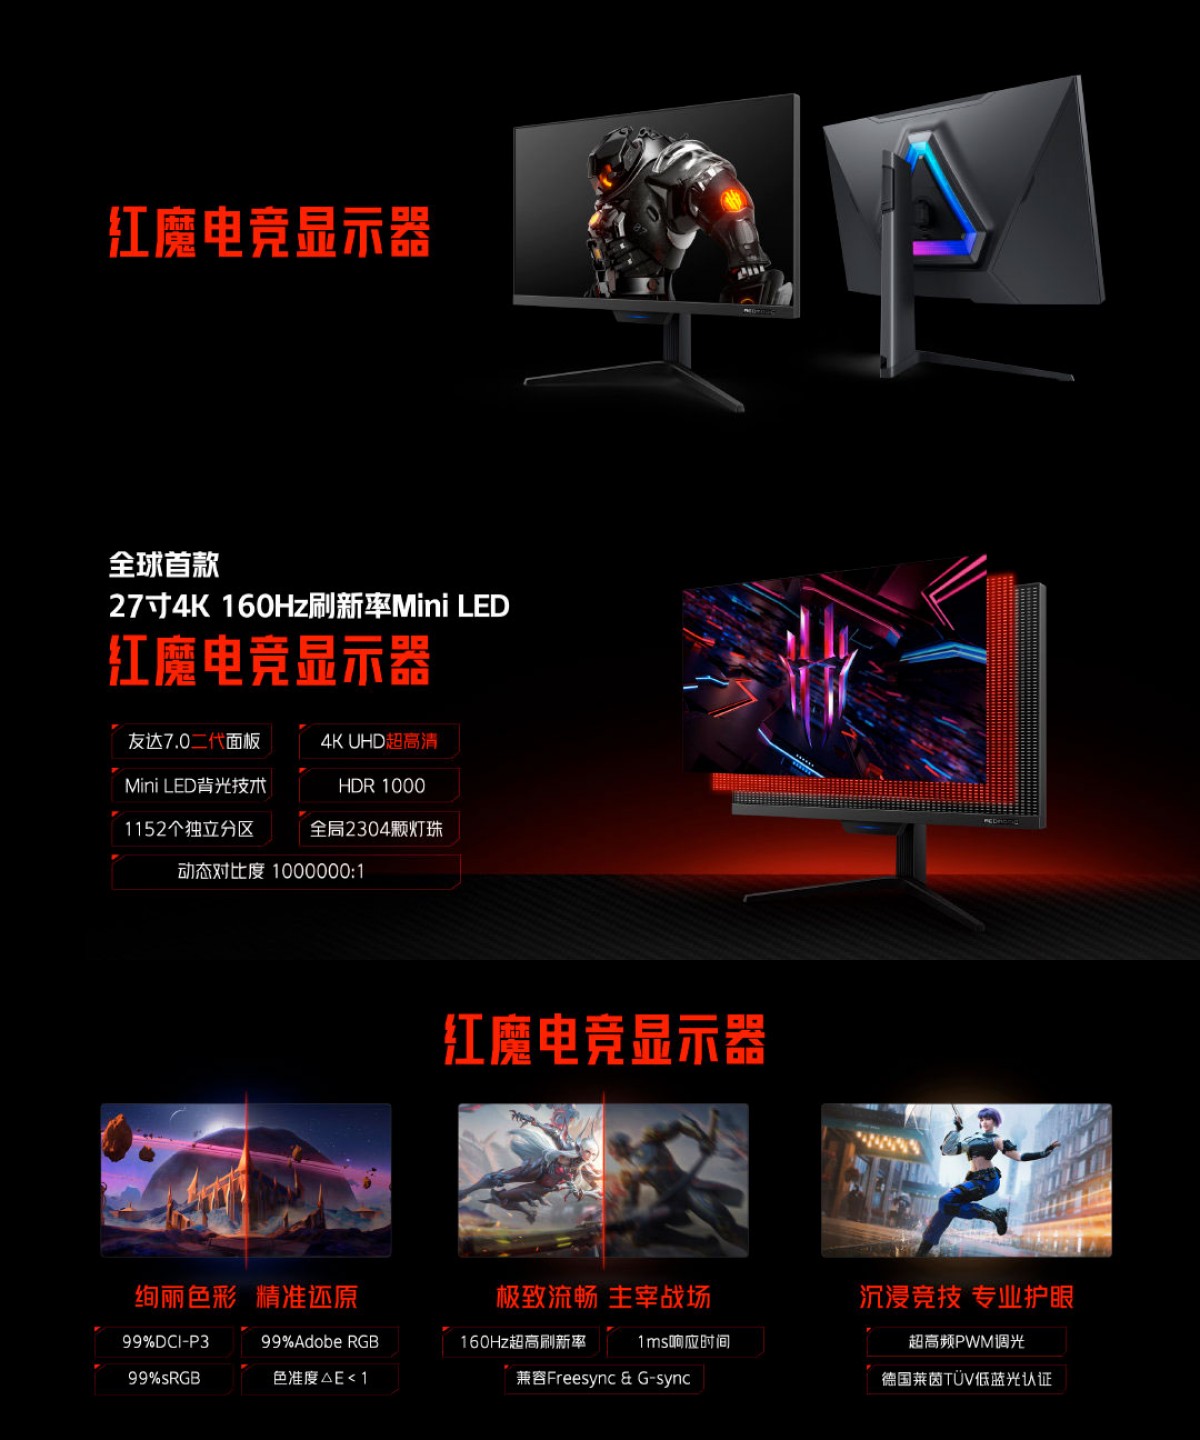 nubia launches Red Magic Gaming Monitor, Keyboard, and Mouse